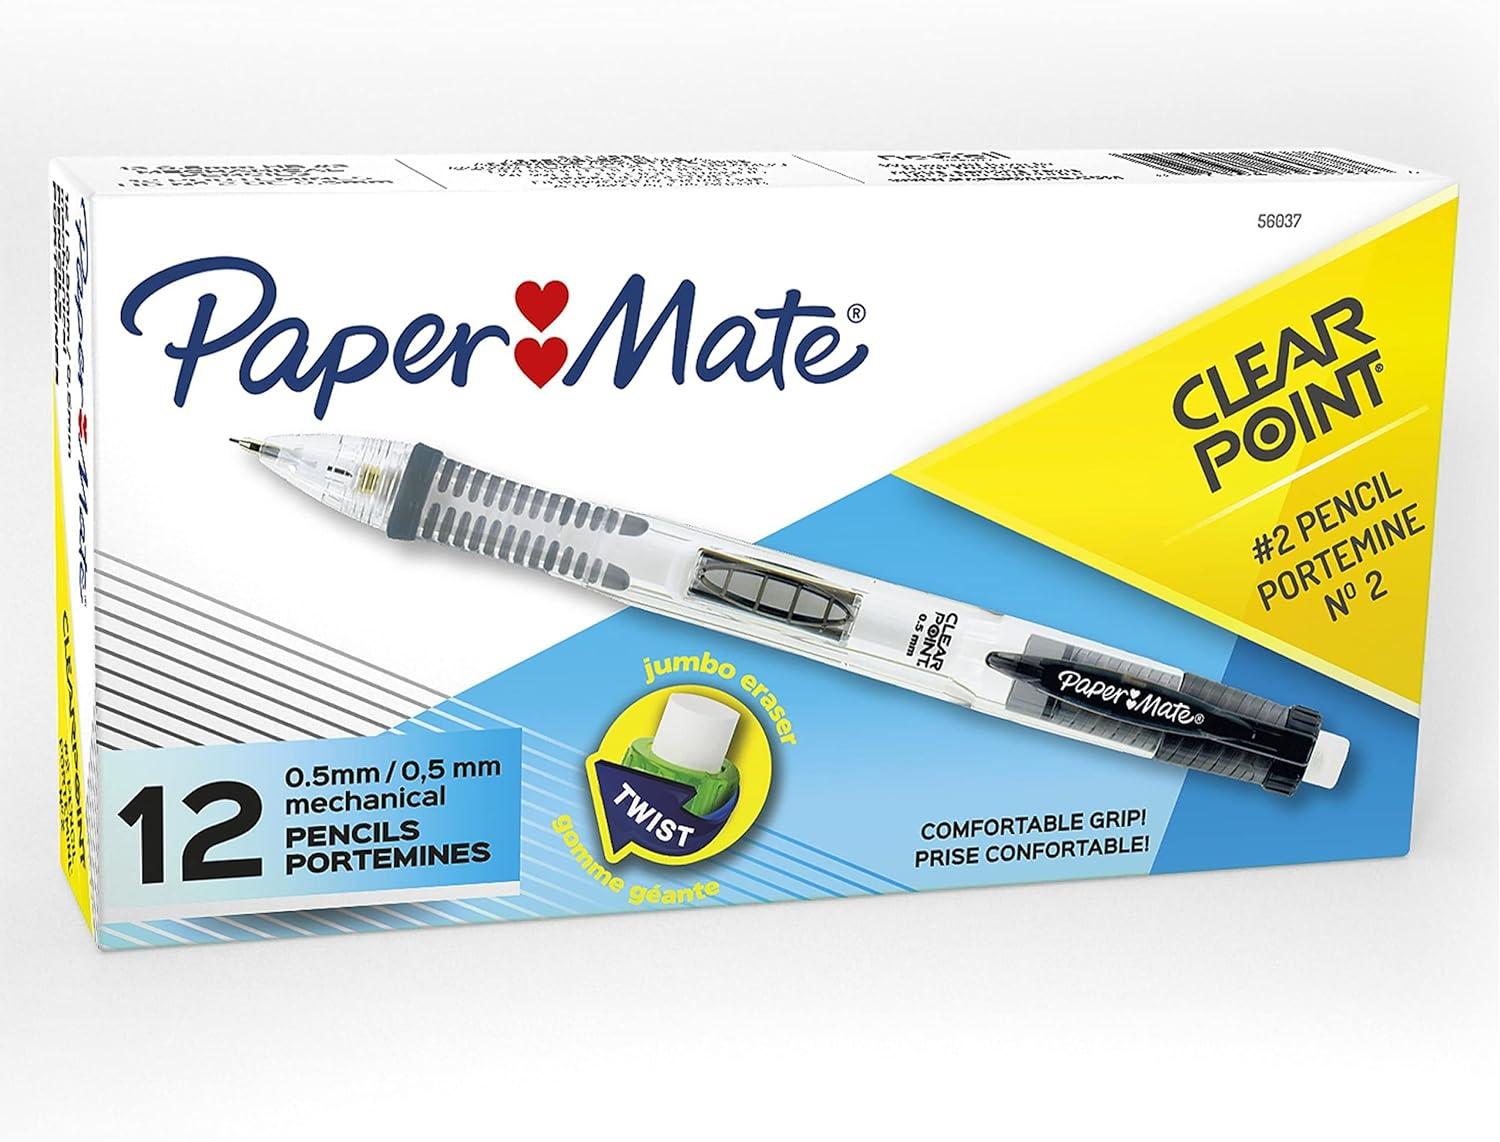 Paper Mate Clearpoint Mechanical Pencils 12 Pack for $8.05